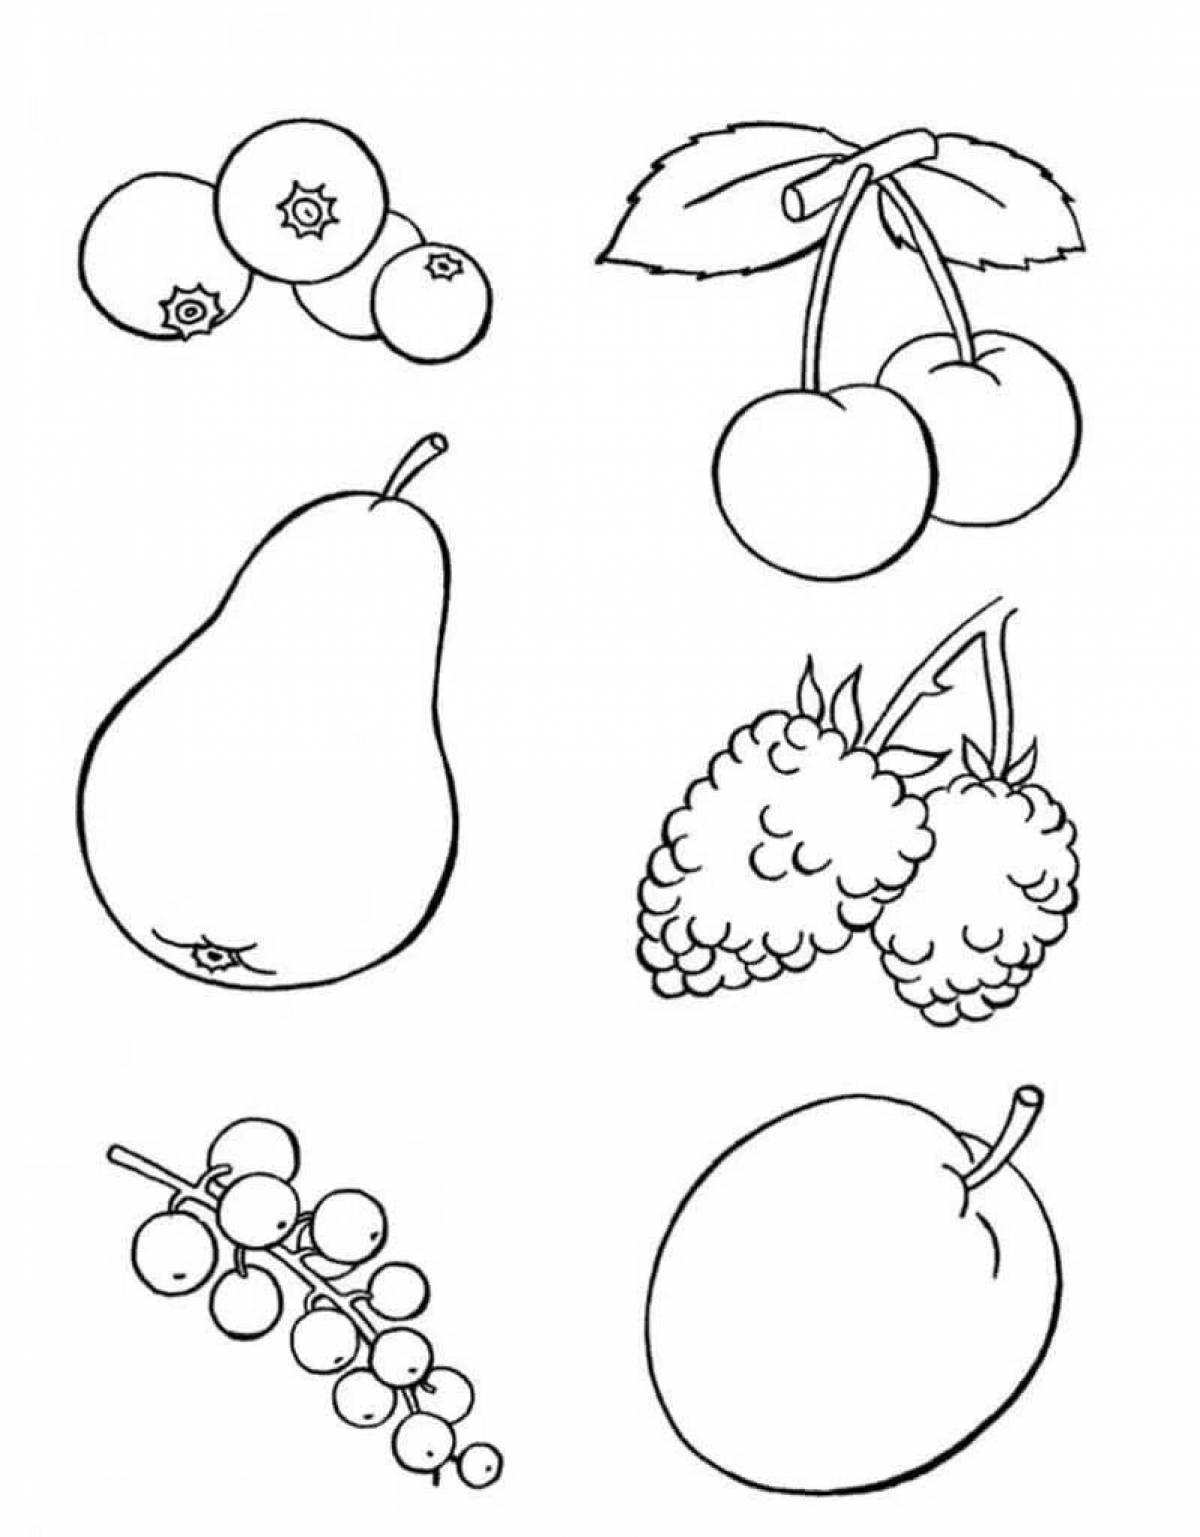 Dazzling fruit and vegetable coloring book for girls